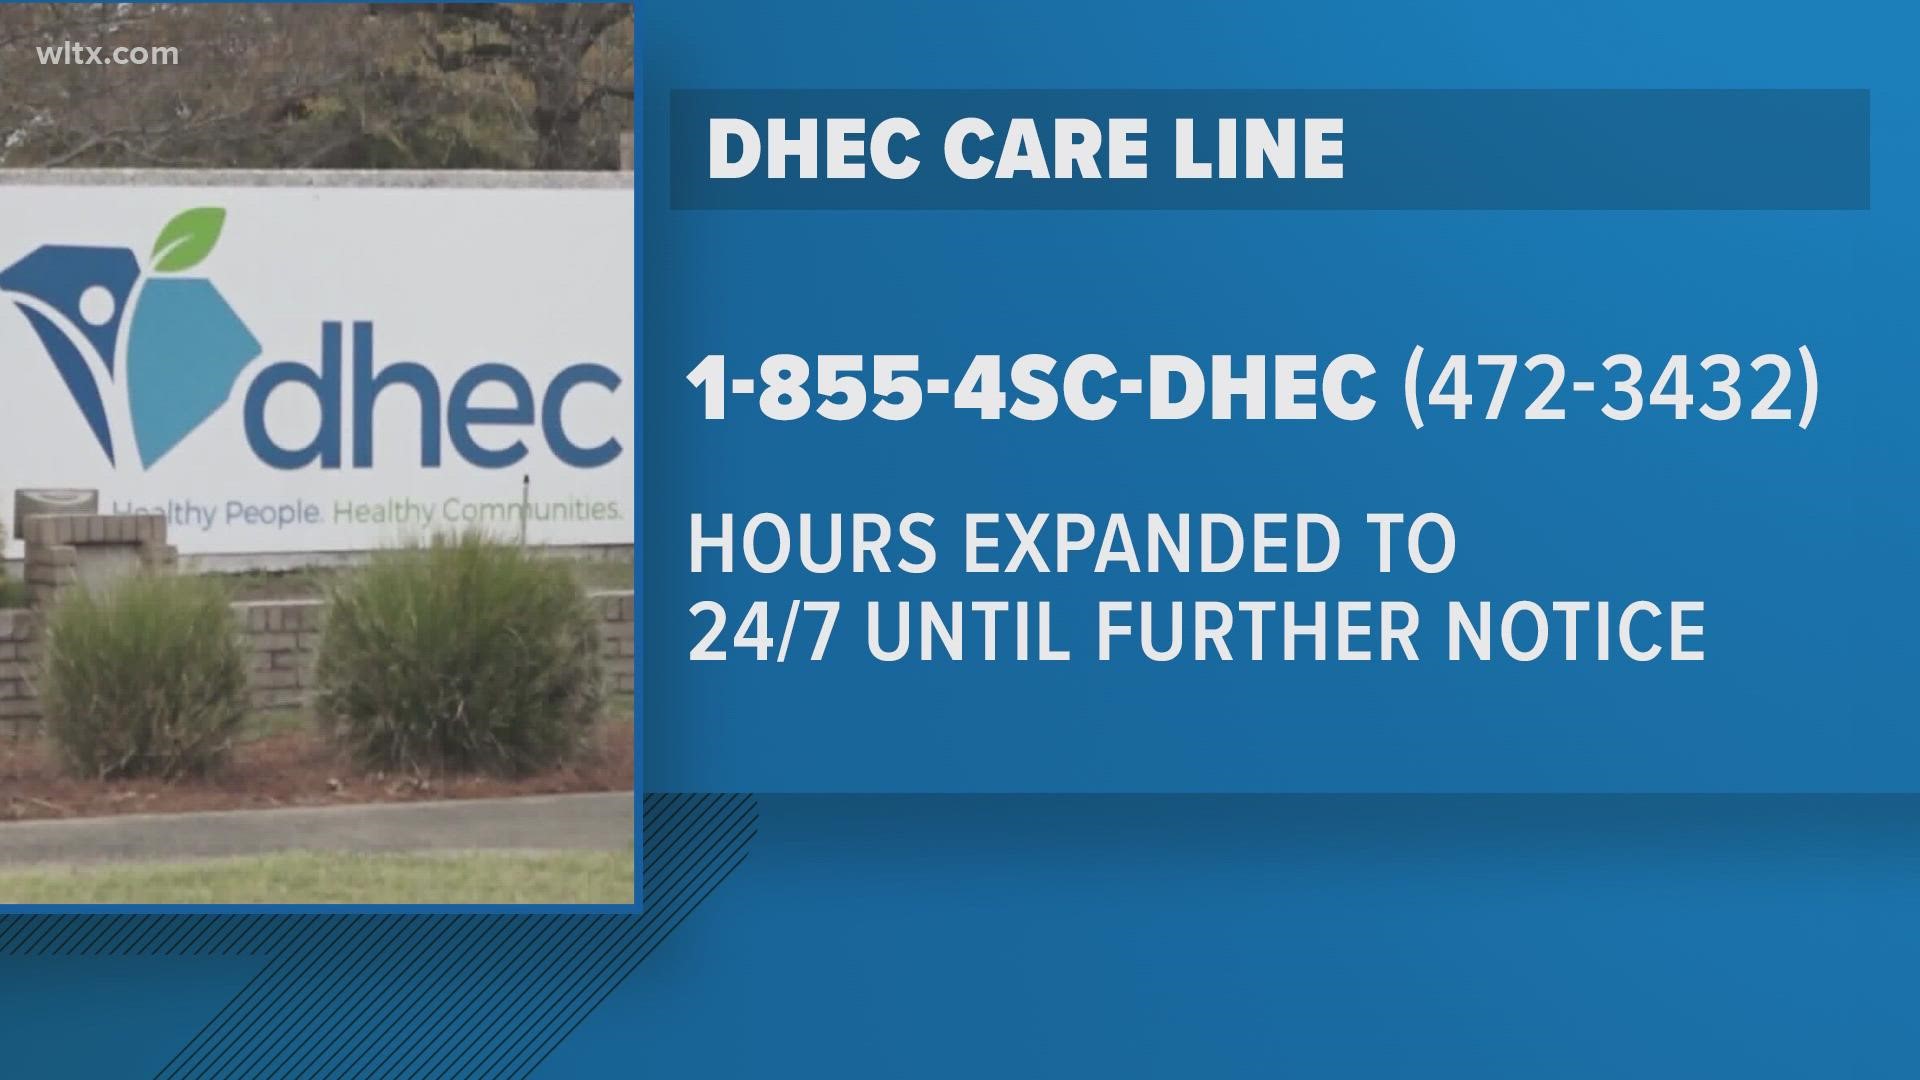 A shelter in Orangeburg is open and DHEC Care Line is now operational.